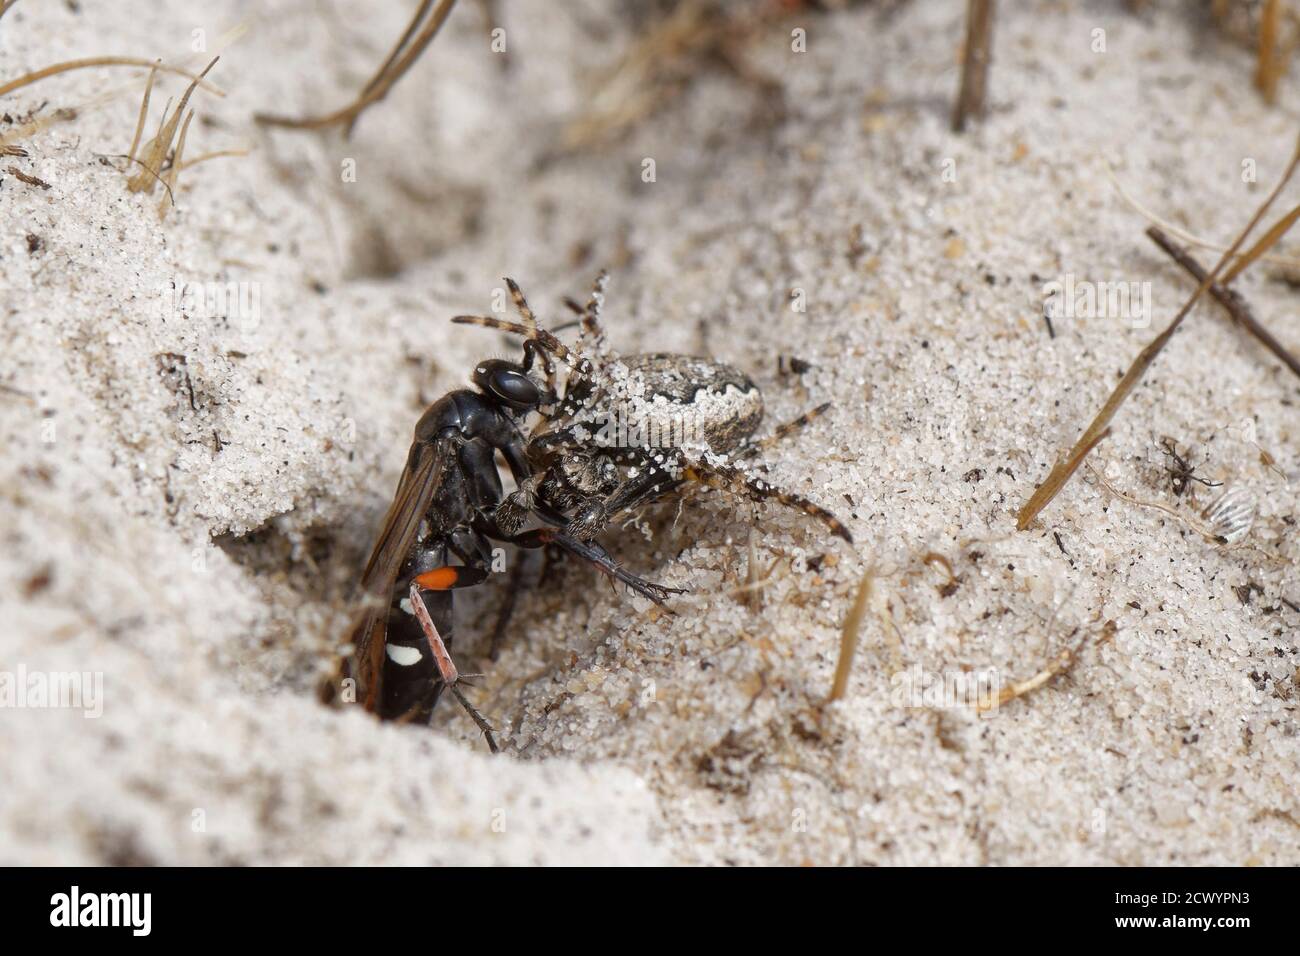 Red-legged spider wasp (Episyron rufipes) dragging a Missing sector orb weaver (Zygiella x-notata) into its nest burrow in sandy heathland, Dorset, UK. Stock Photo